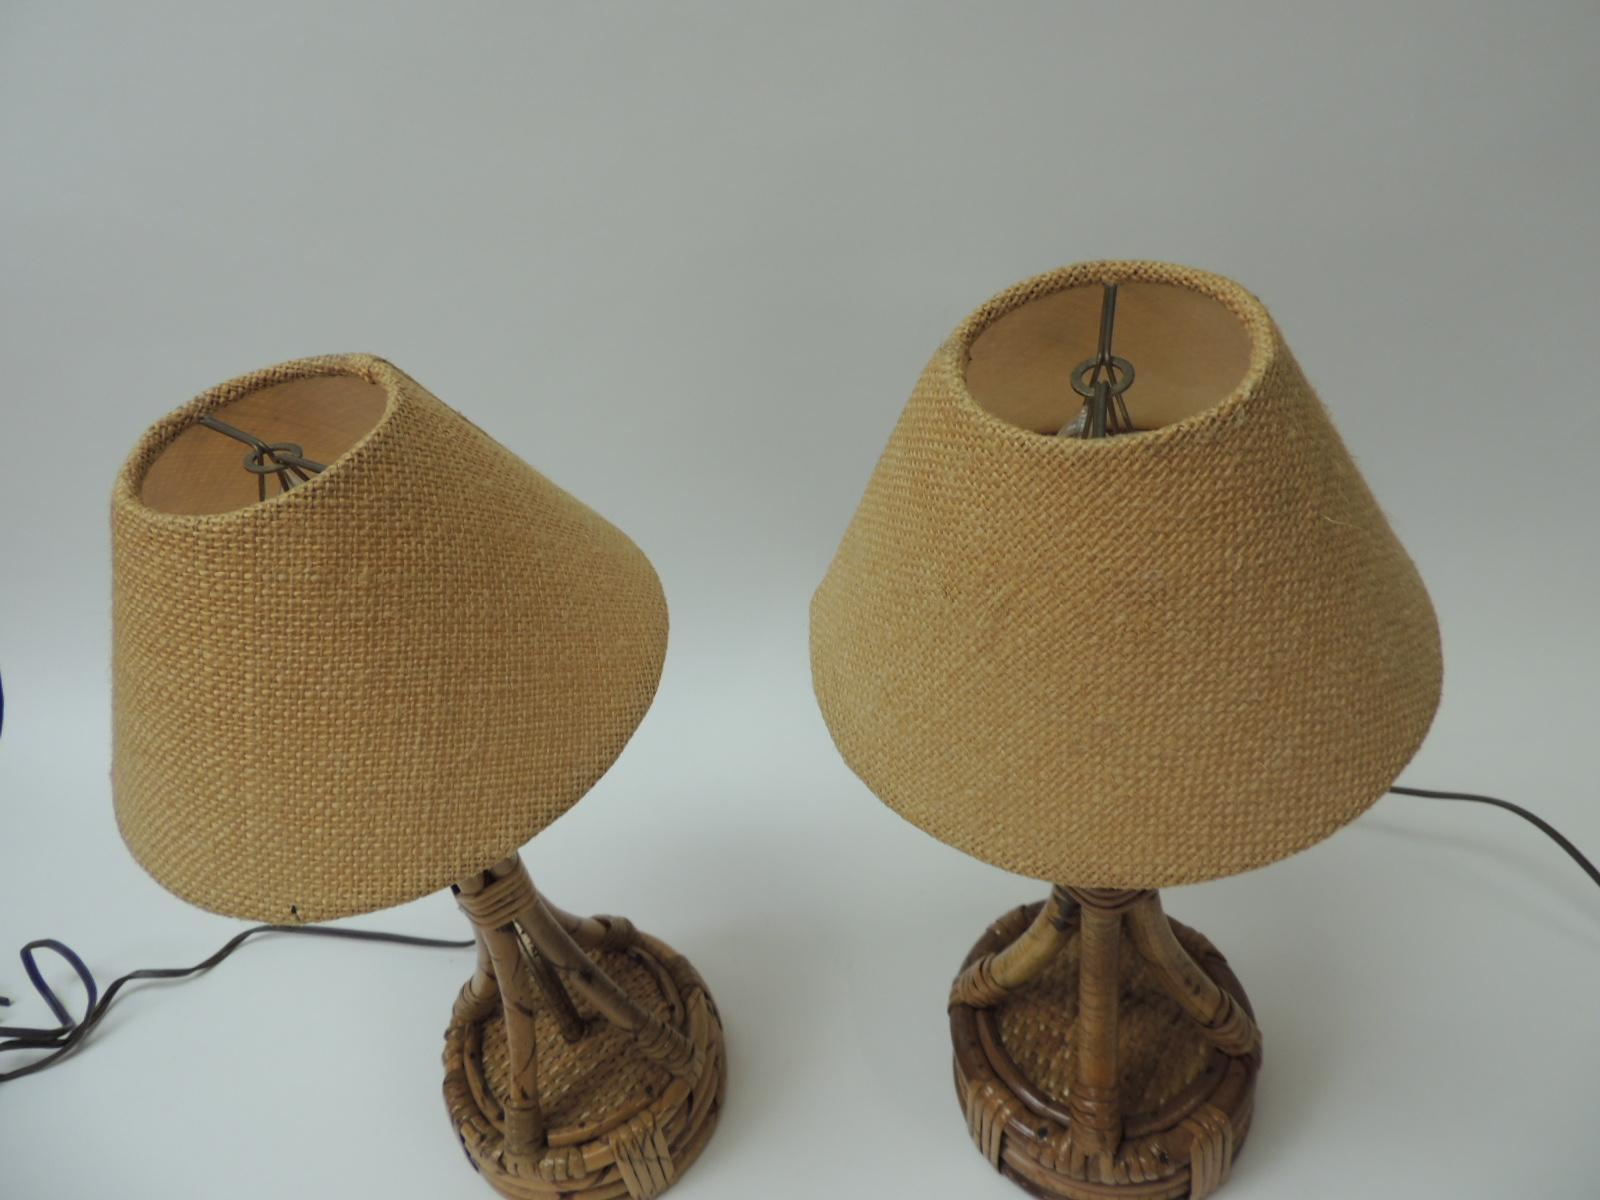 Pair of small vintage bamboo and rattan table lamps. Round base with original burlap clip-on shades.
Including the (2) light bulbs. Brass fittings and brown plug in cord.
Size: 5.5 base x 15.5 height
Shades: 7.5 bt x 4 H x 3Tp.